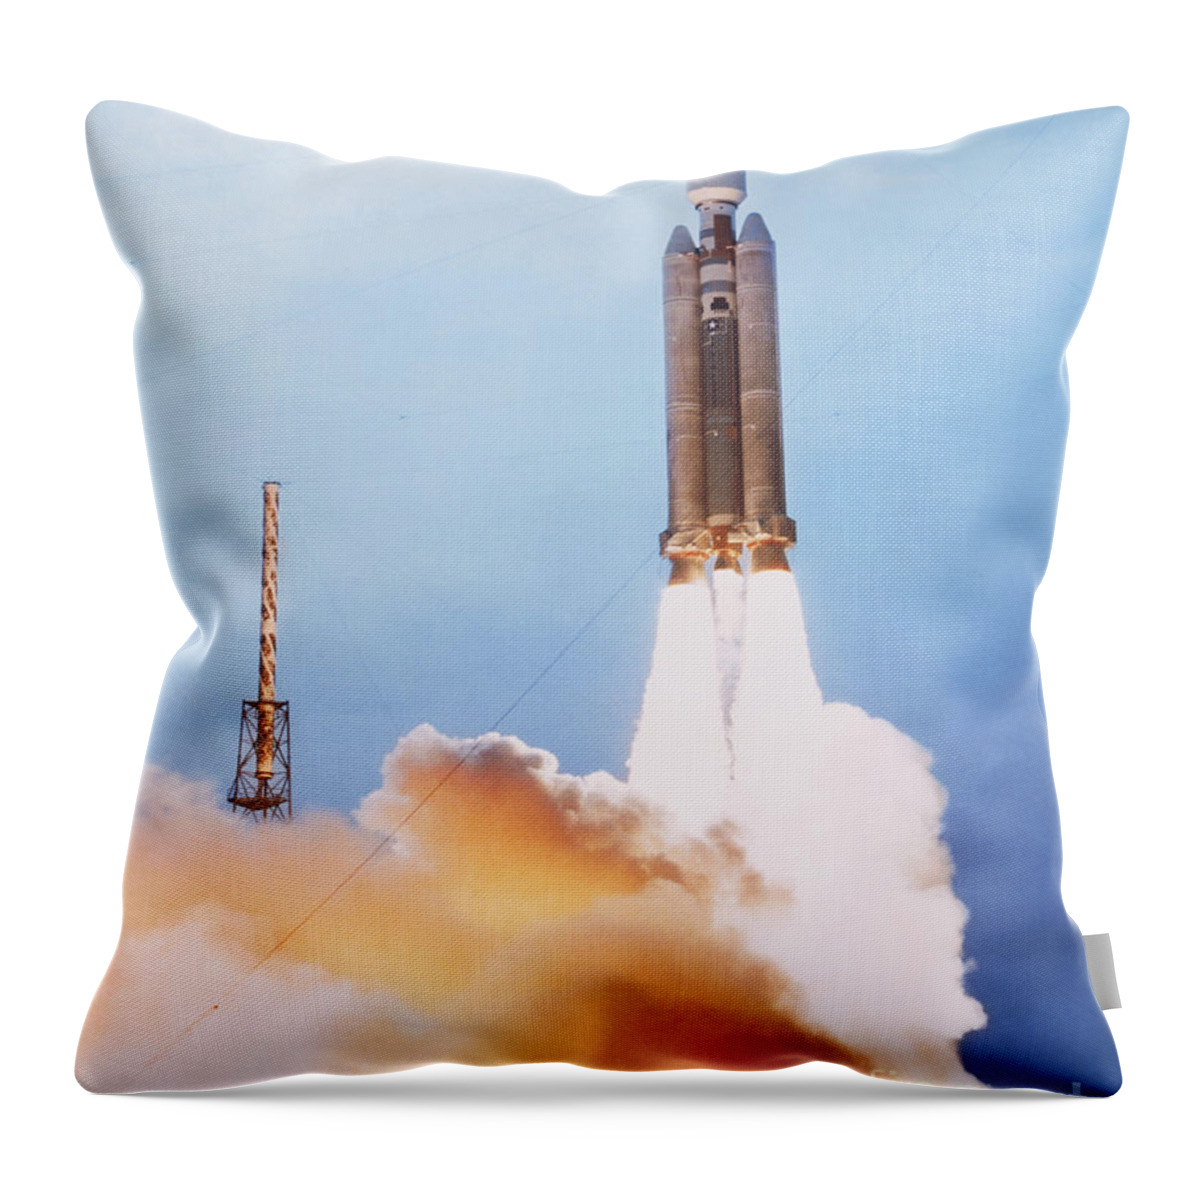 Transport Throw Pillow featuring the photograph Titan Iv Rocket by Science Source